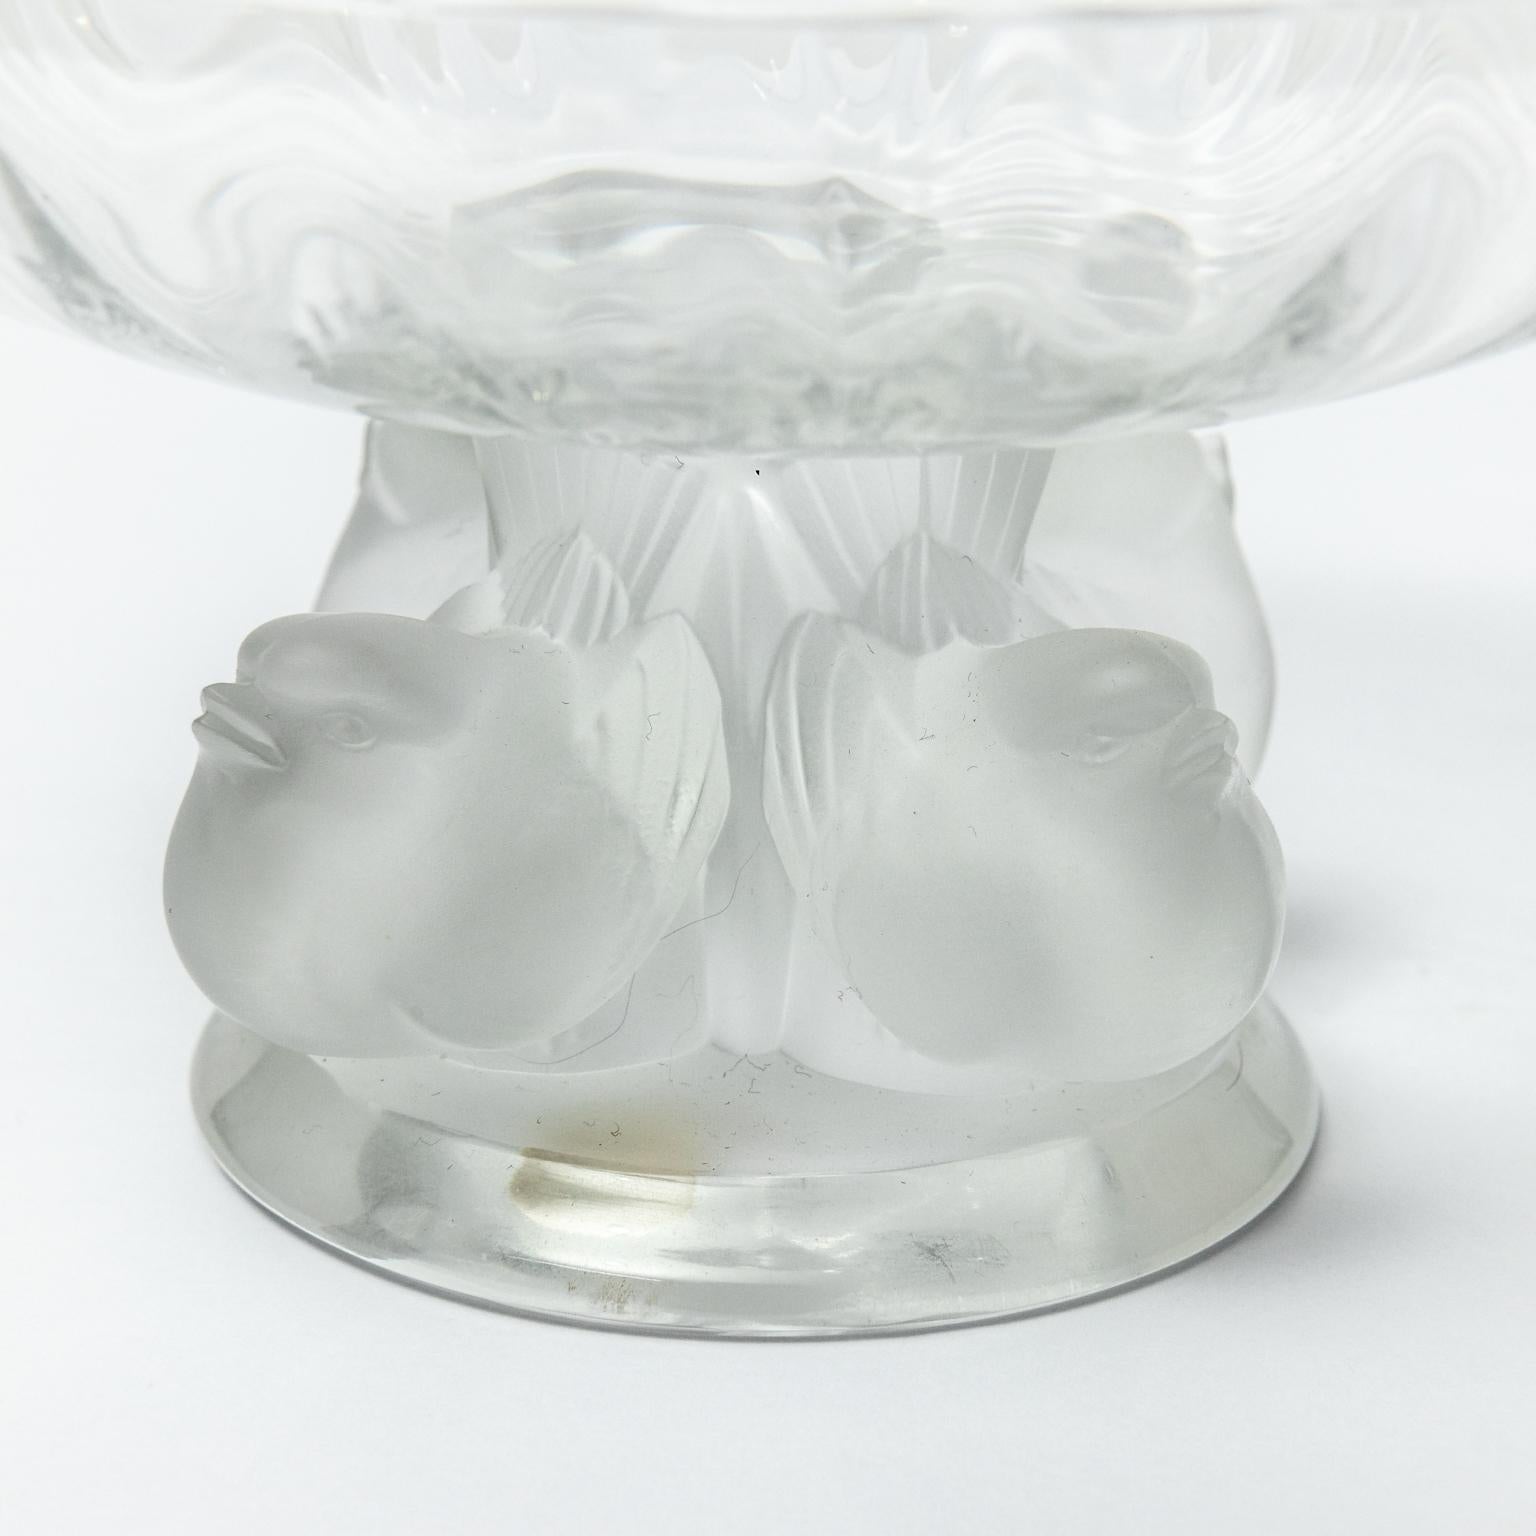 Circa 20th century glass nogent bowl designed by Marc Lalique in 1966. This small bowl has become a Lalique classic. The satin finish on the birds contrast with the transparency of the bowl and the purity of the crystal. Made in France. Please note